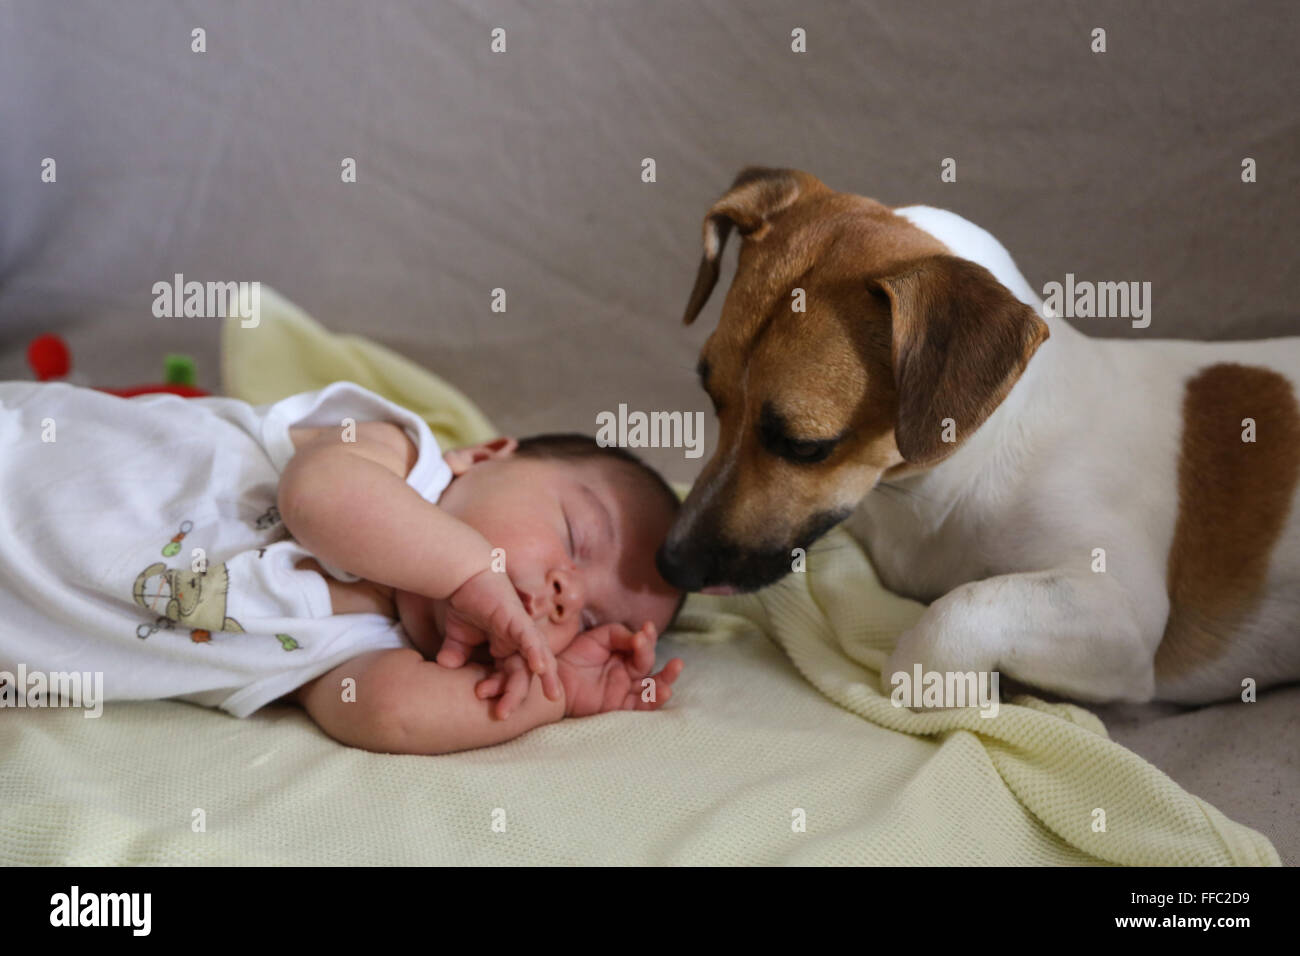 infant baby sleeping while a jack russel dog is looking at her Stock Photo